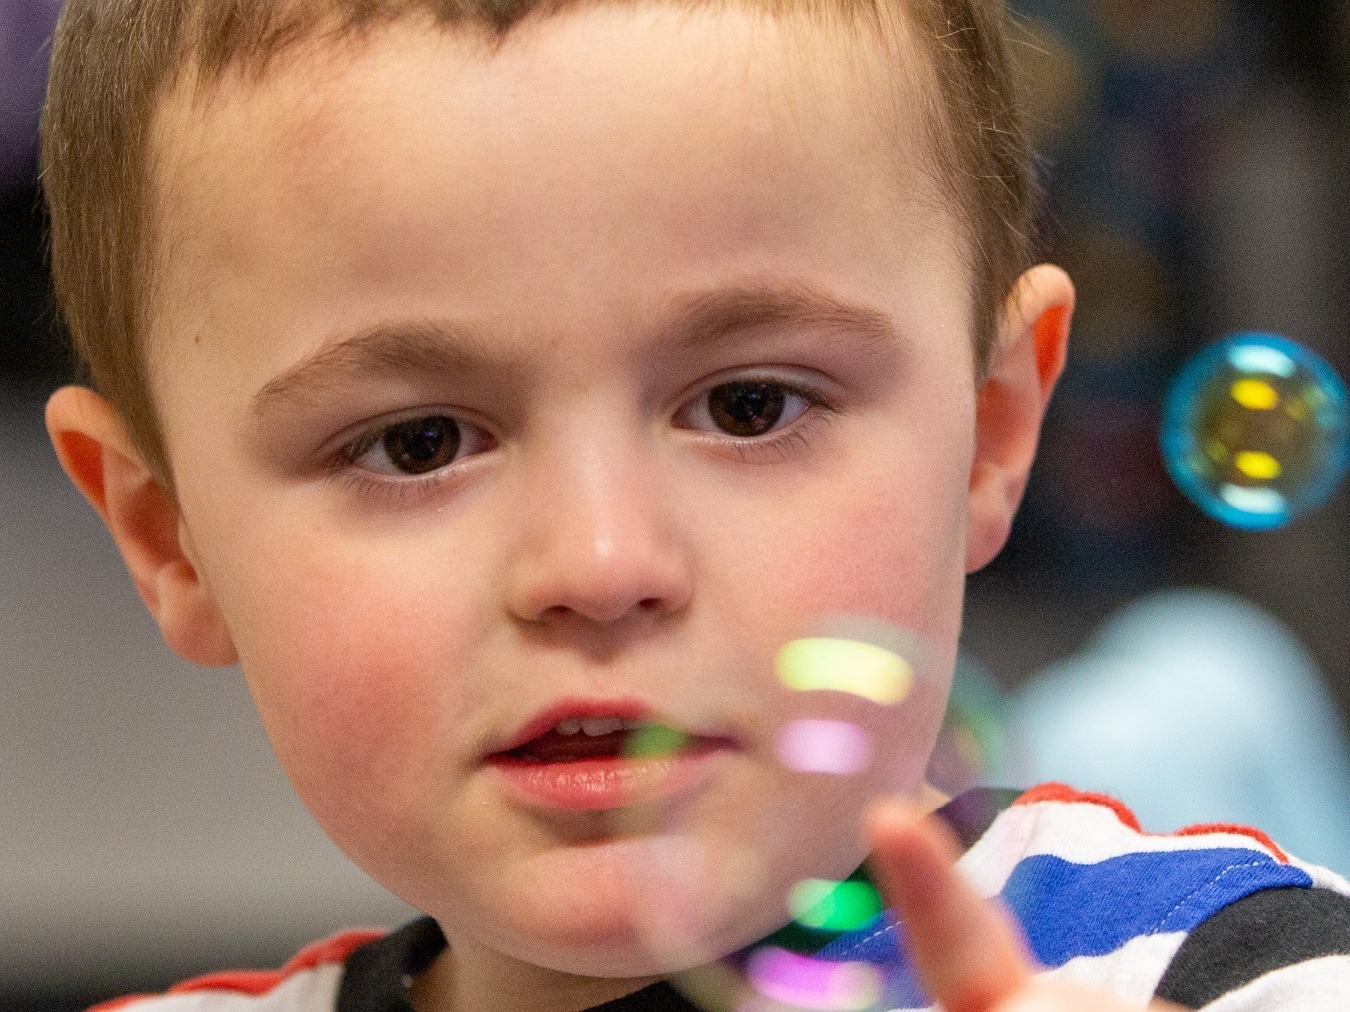 Bubbles, bubbles - a young boy with learning difficulties having his school photograph taken.